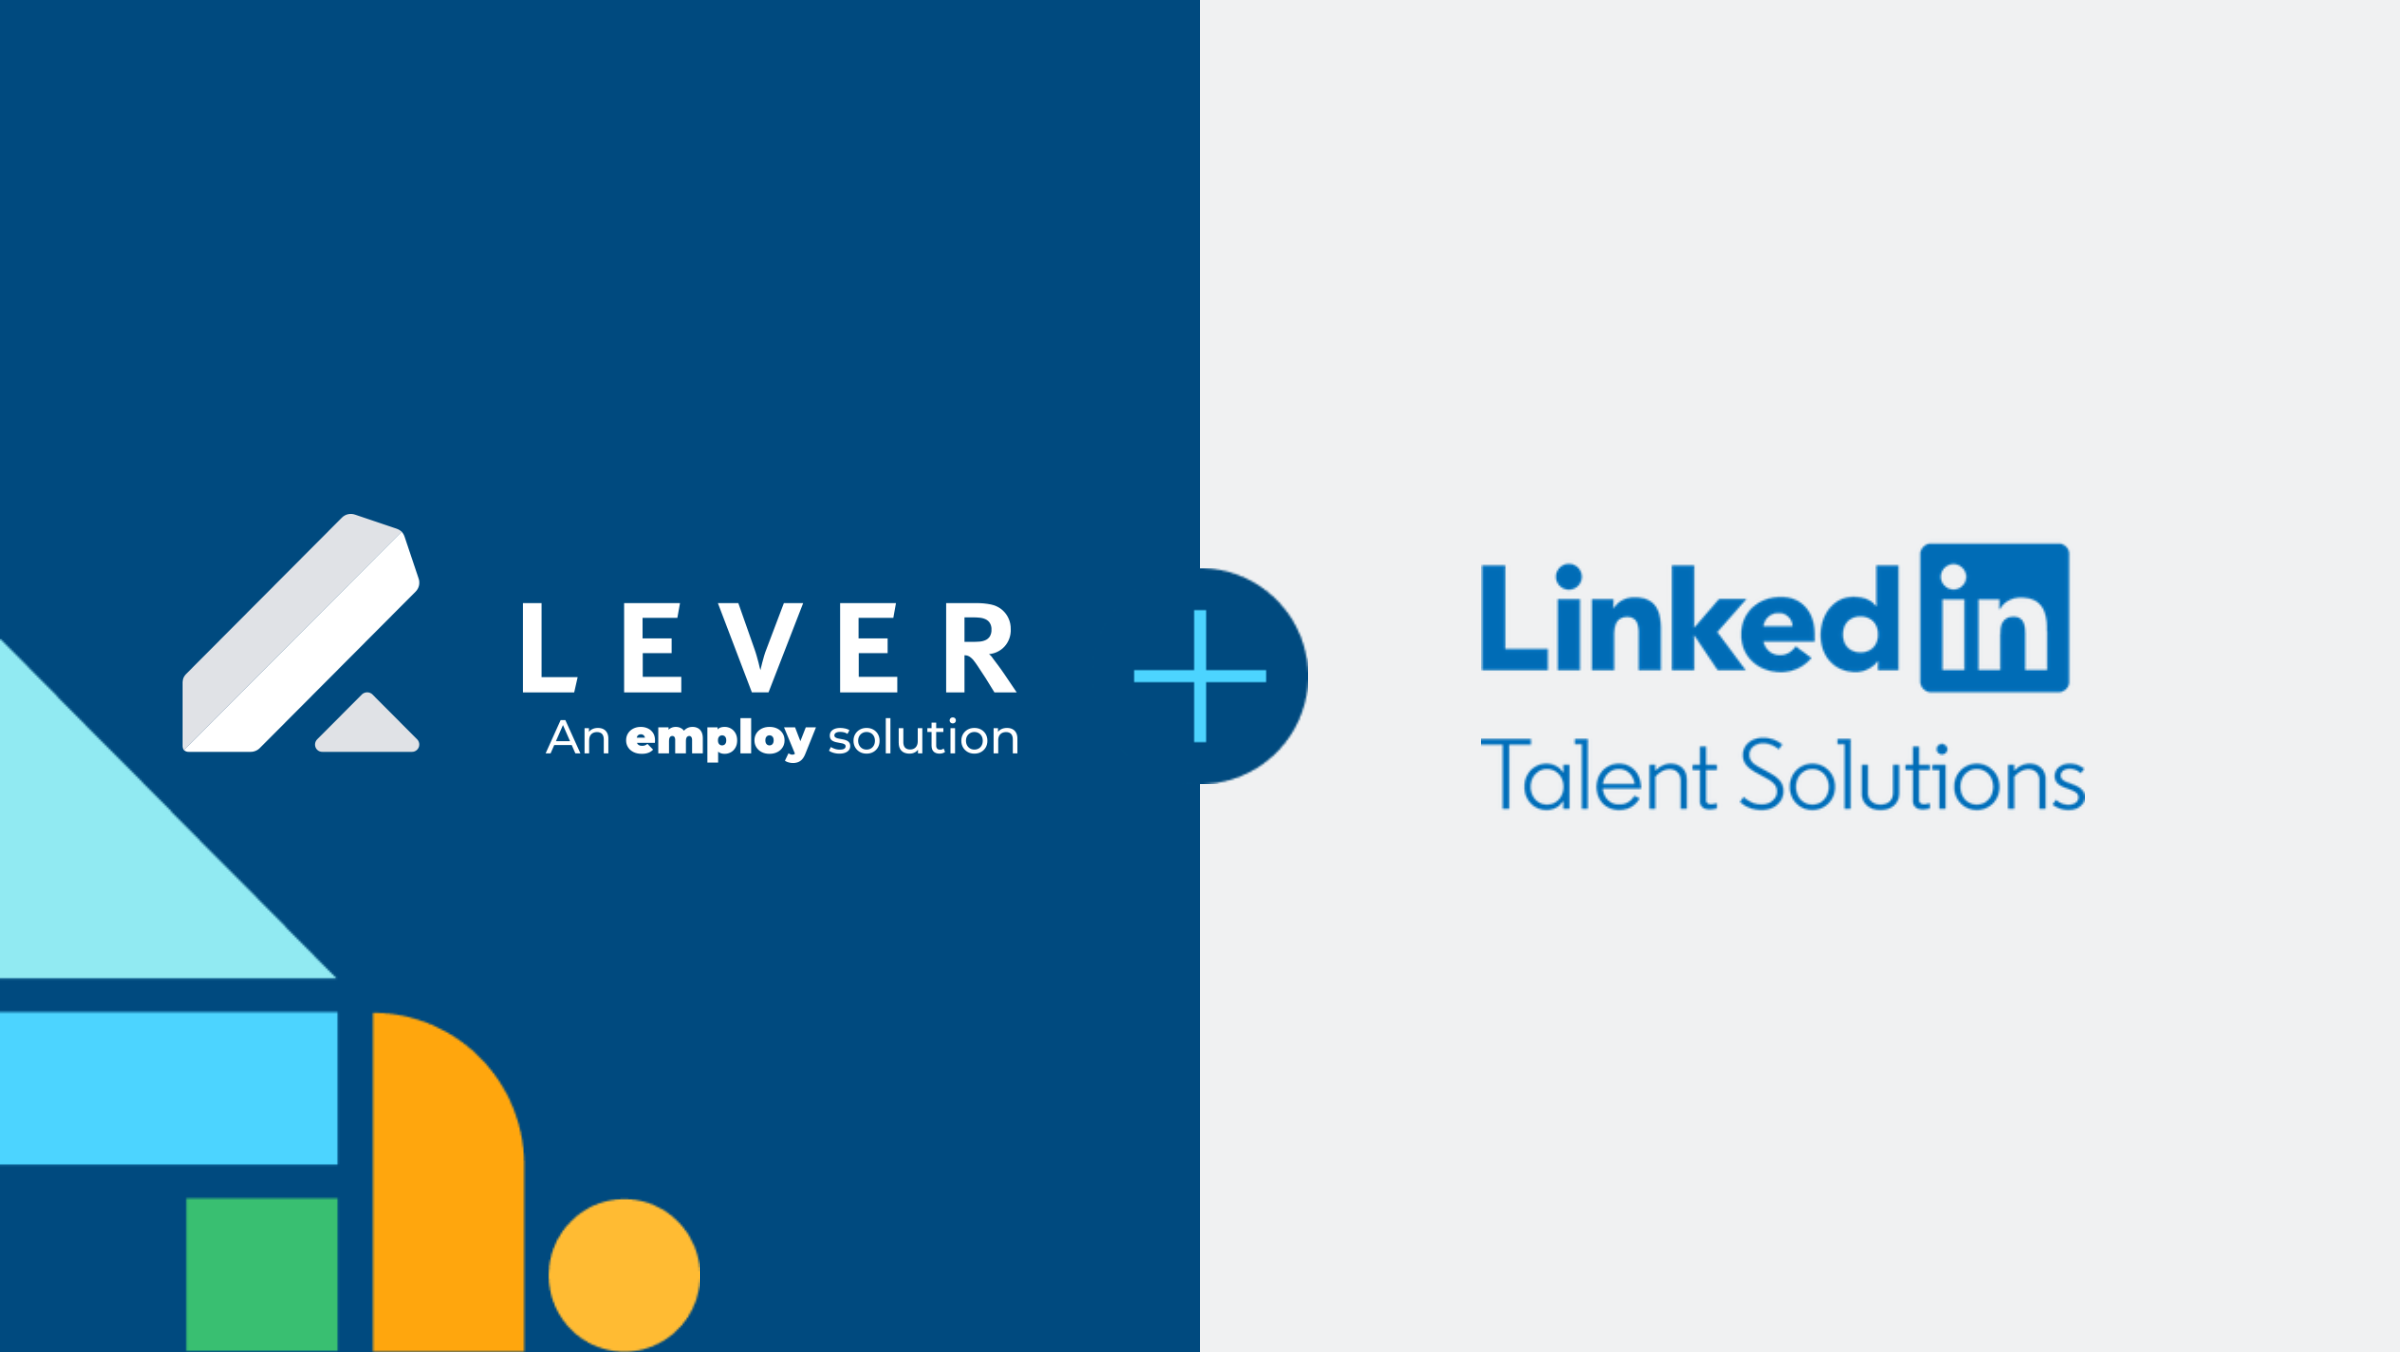 Learn more about the LinkedIn 